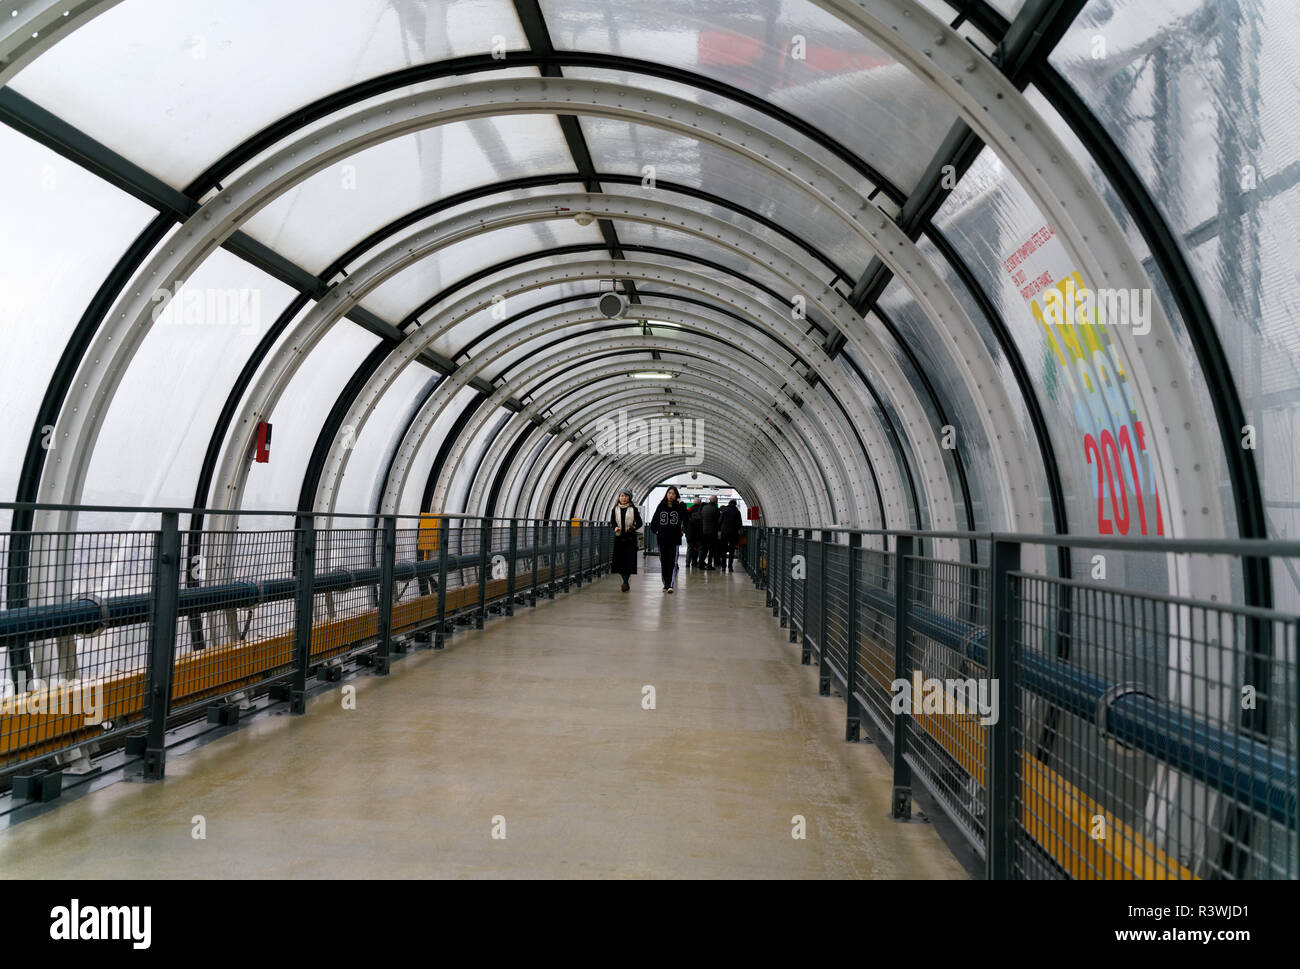 Renzo Piano designed the Centre national d'art et de culture Georges-Pompidou in Paris, with outside walkways to shelter visitors from wind and rain. Stock Photo